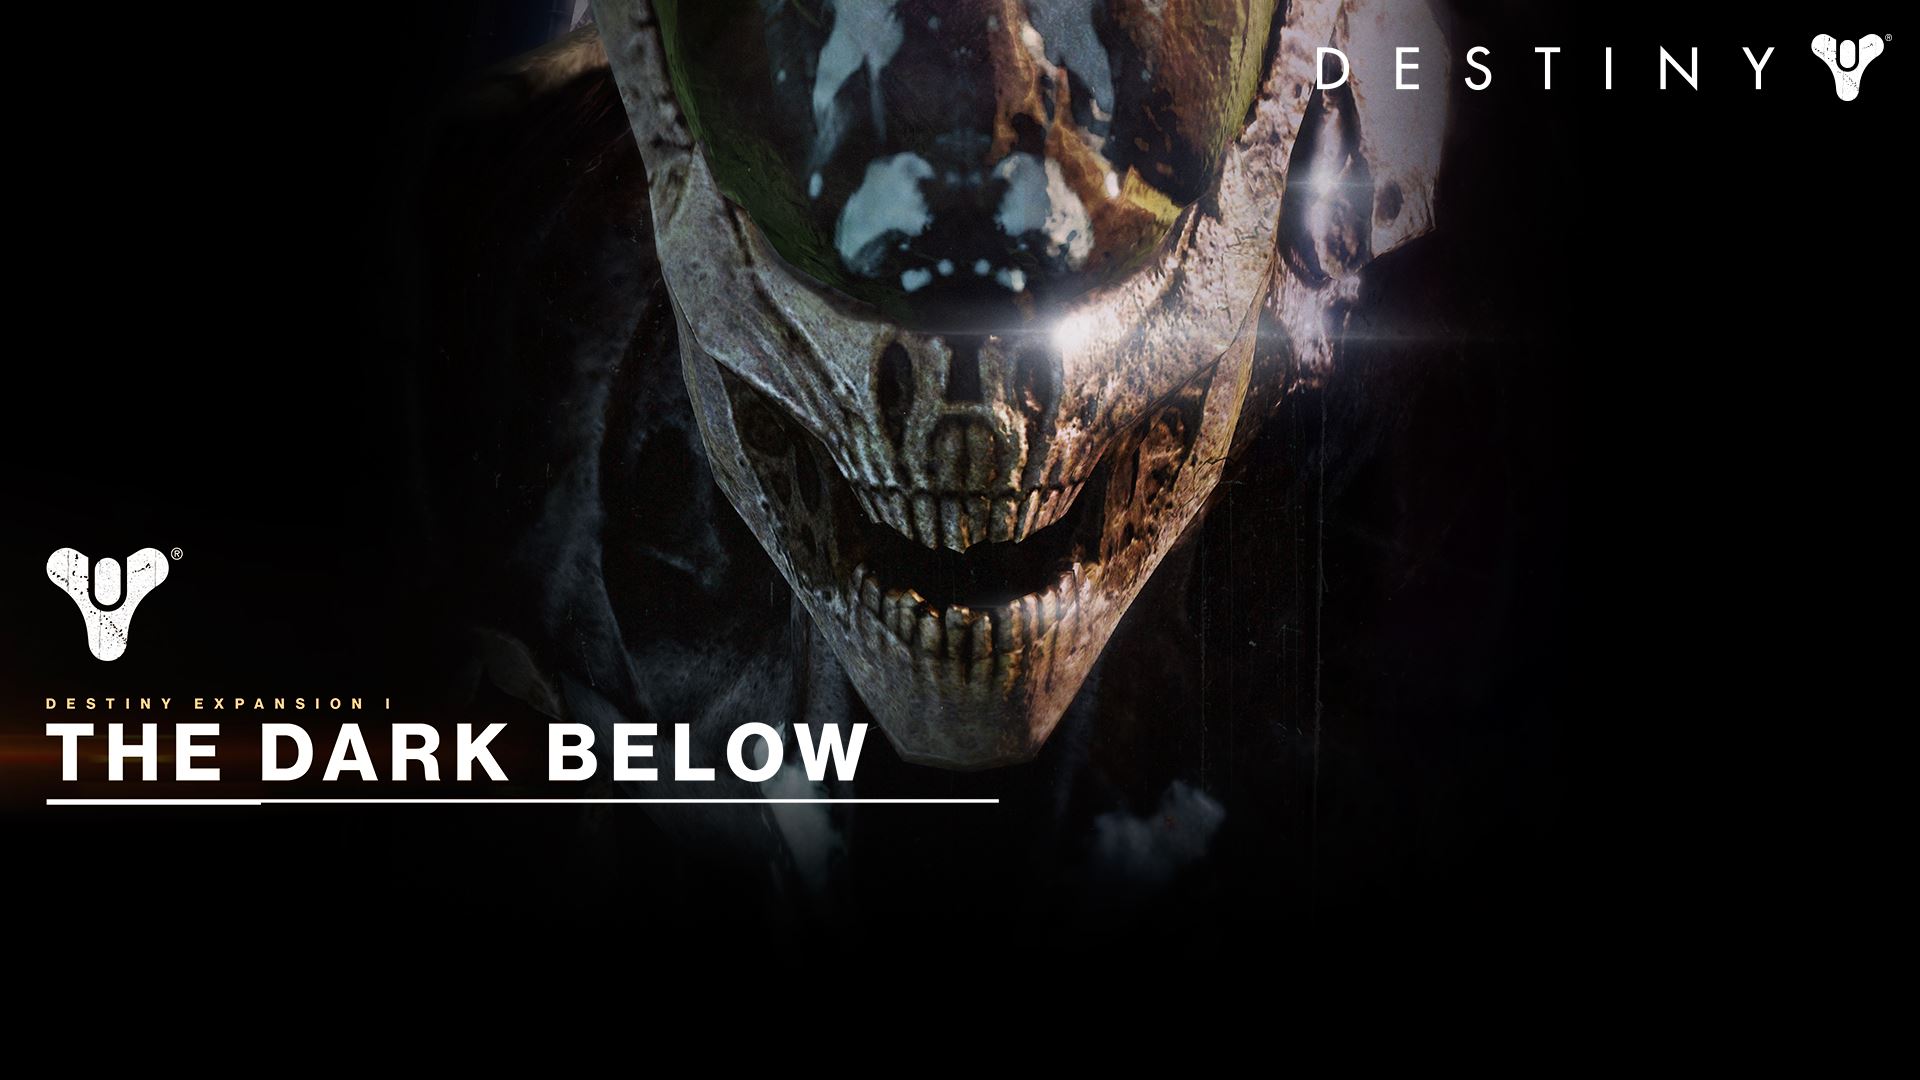 Destiny Universe Expands with Release of Destiny Expansion I: The Dark Below